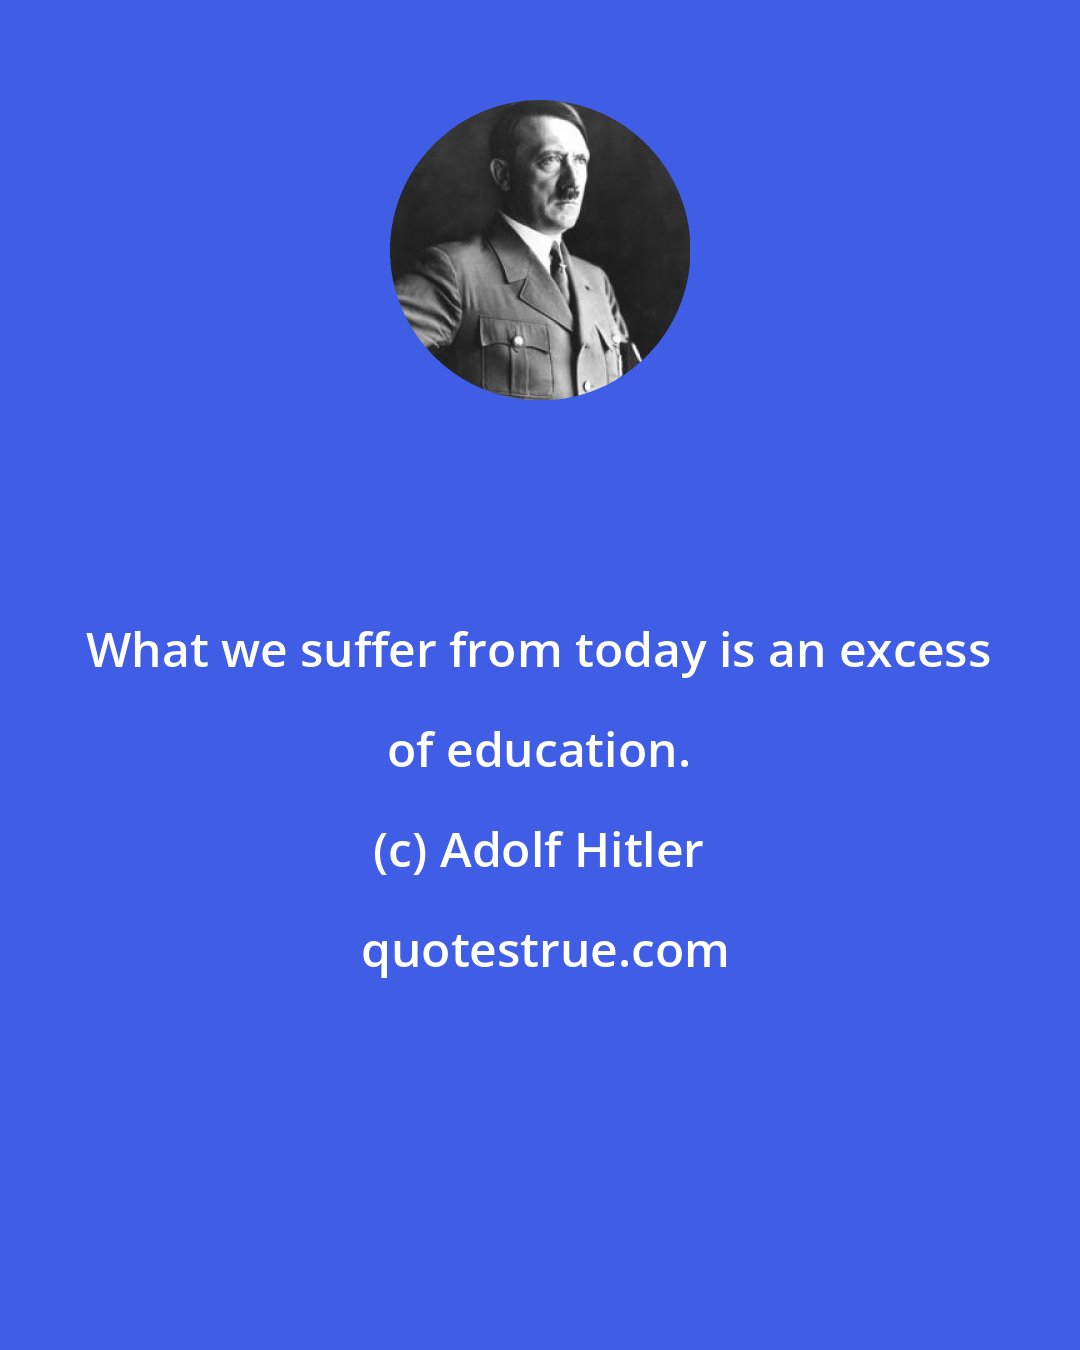 Adolf Hitler: What we suffer from today is an excess of education.